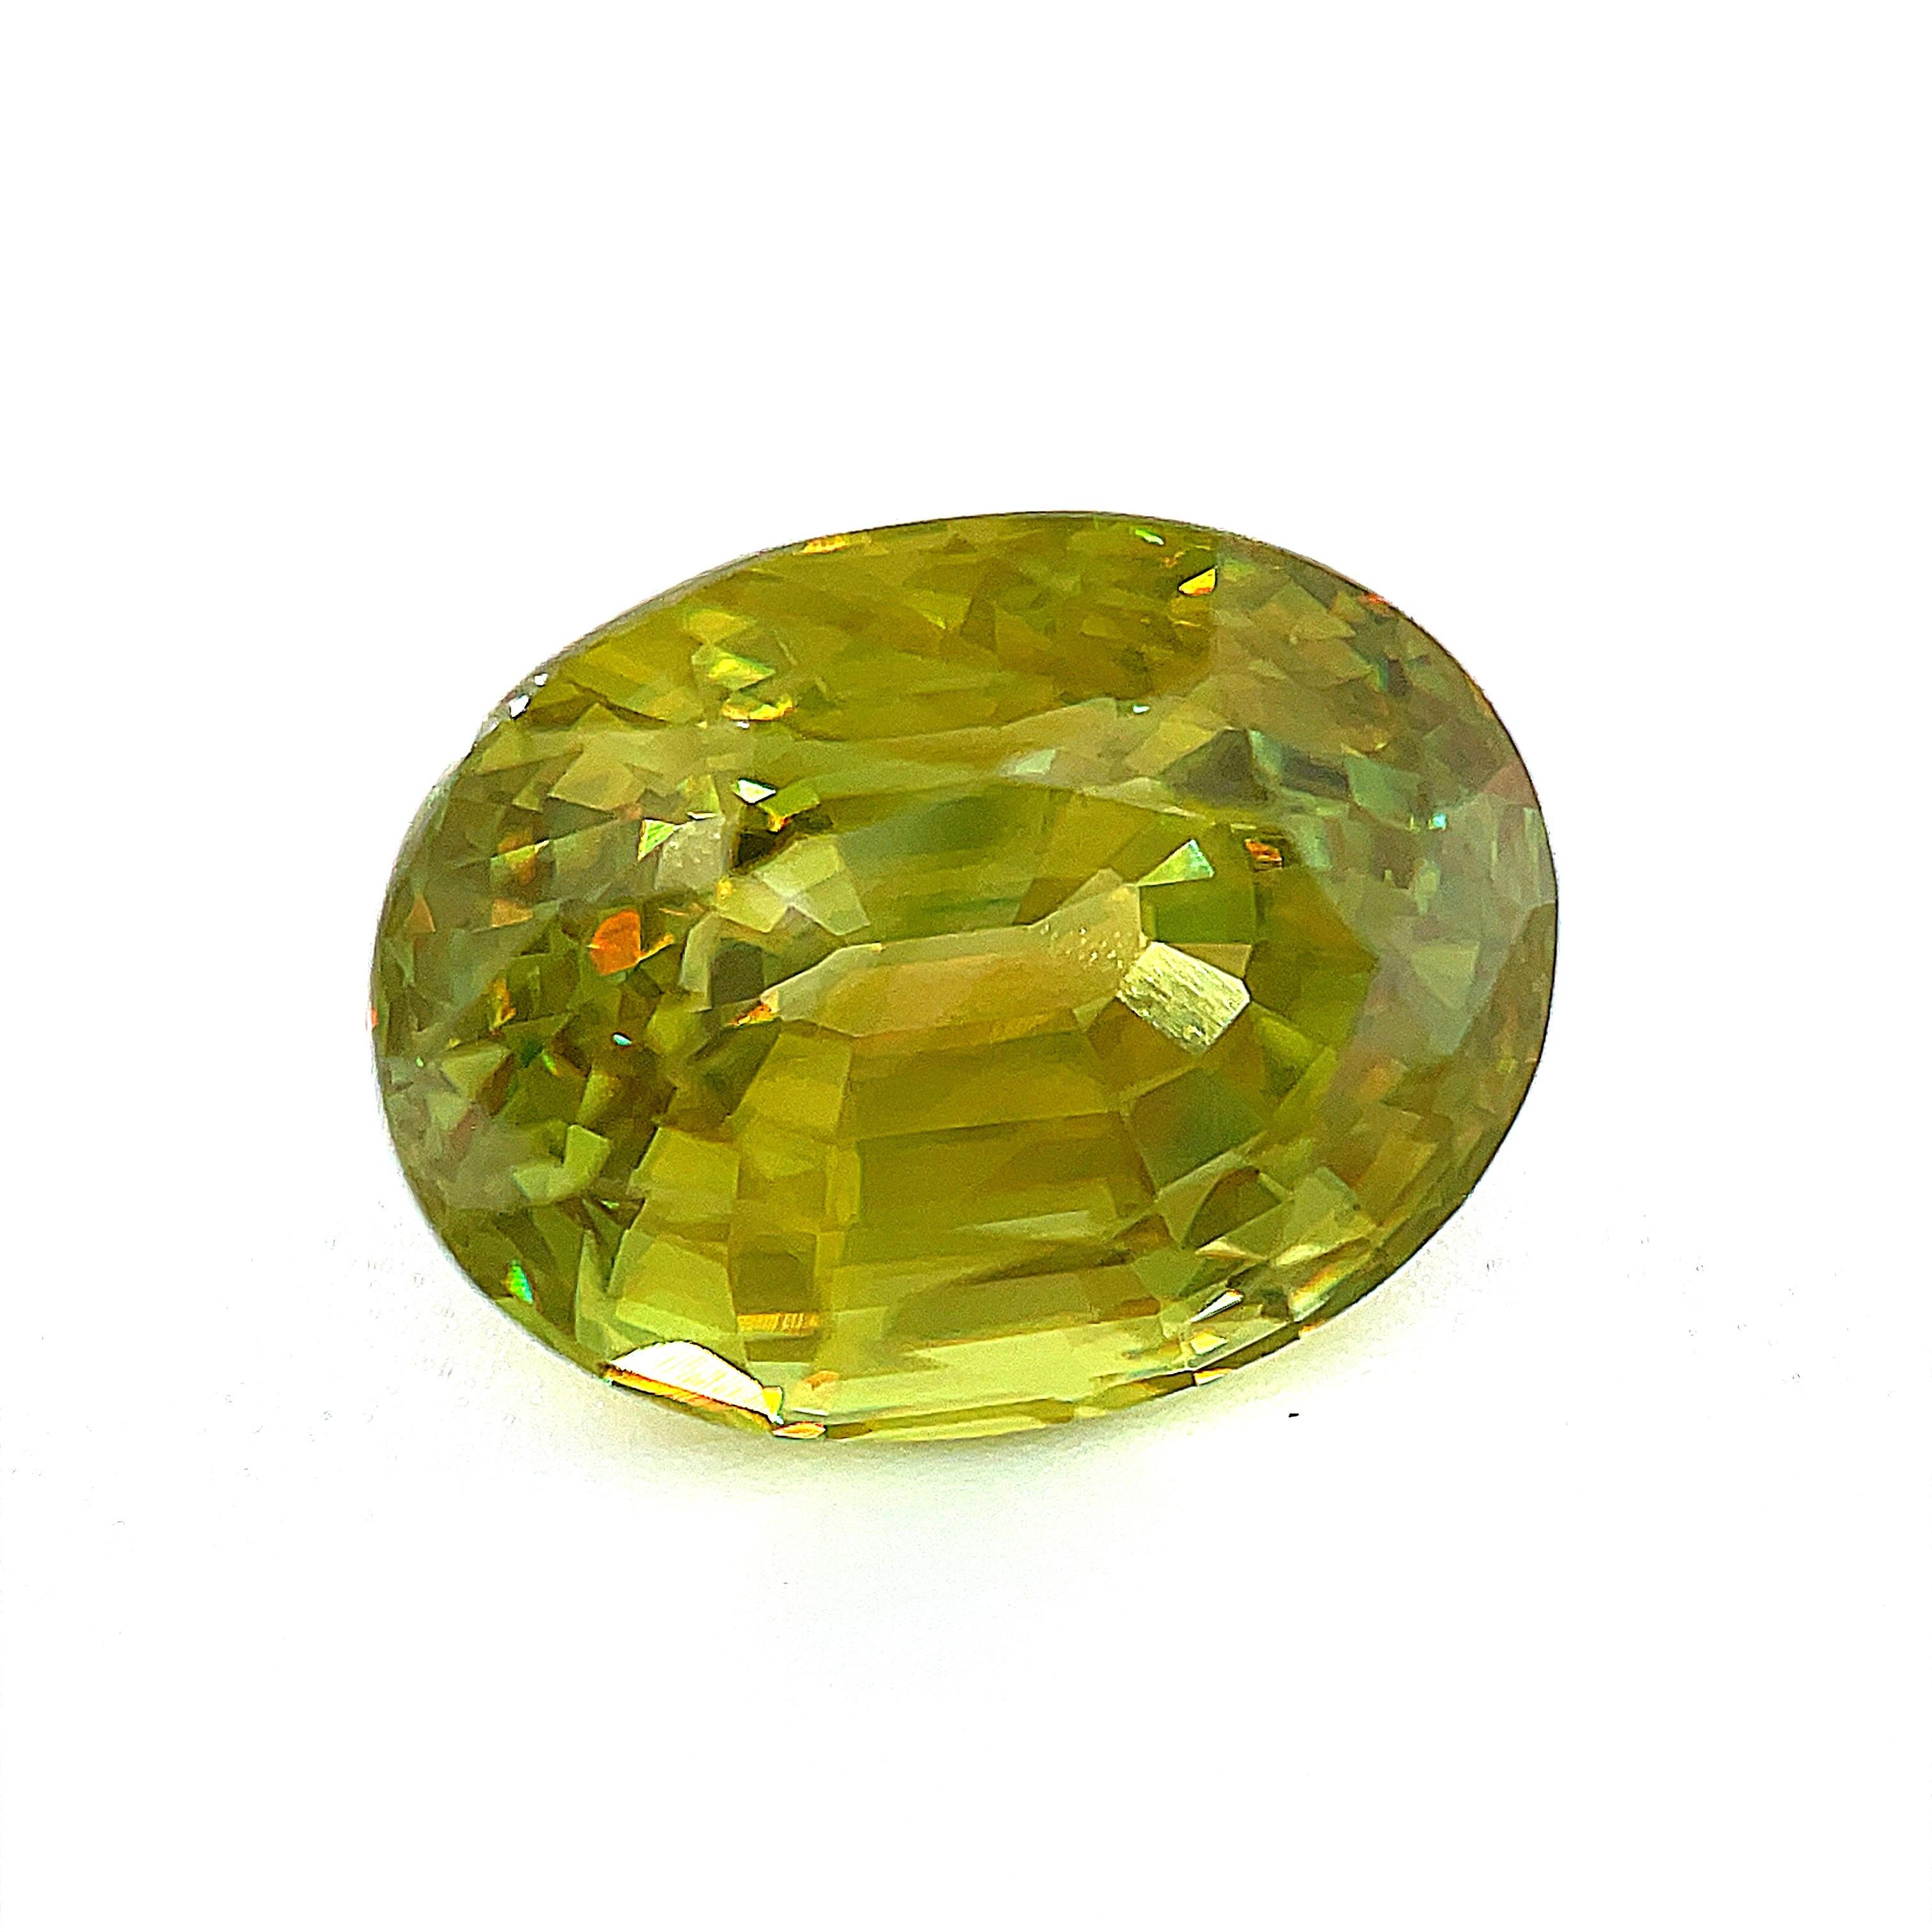 This 7.95 carat oval-shaped sphene is the perfect example of a rare collector gemstone! Displaying sphene's characteristic dispersion to a superior degree, it shows off brilliant flashes of yellow, orange, and blue simultaneously throughout its